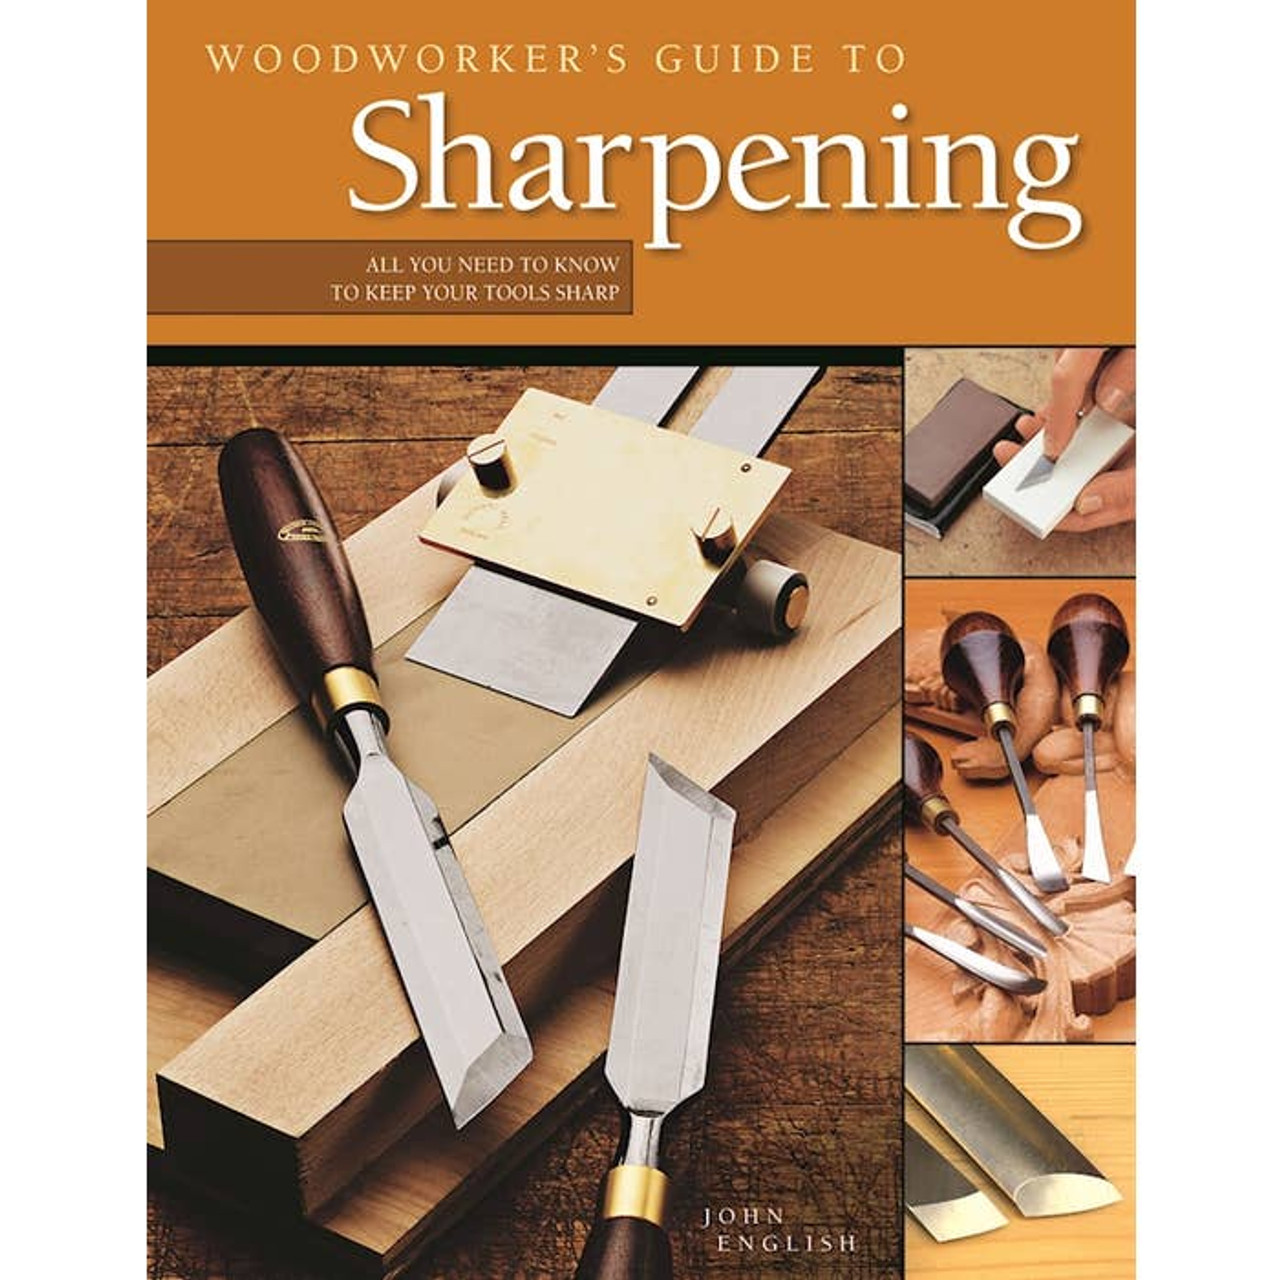 Front cover of Woodworker's Guide To Sharpening. All you need to know to keep your tools sharp.